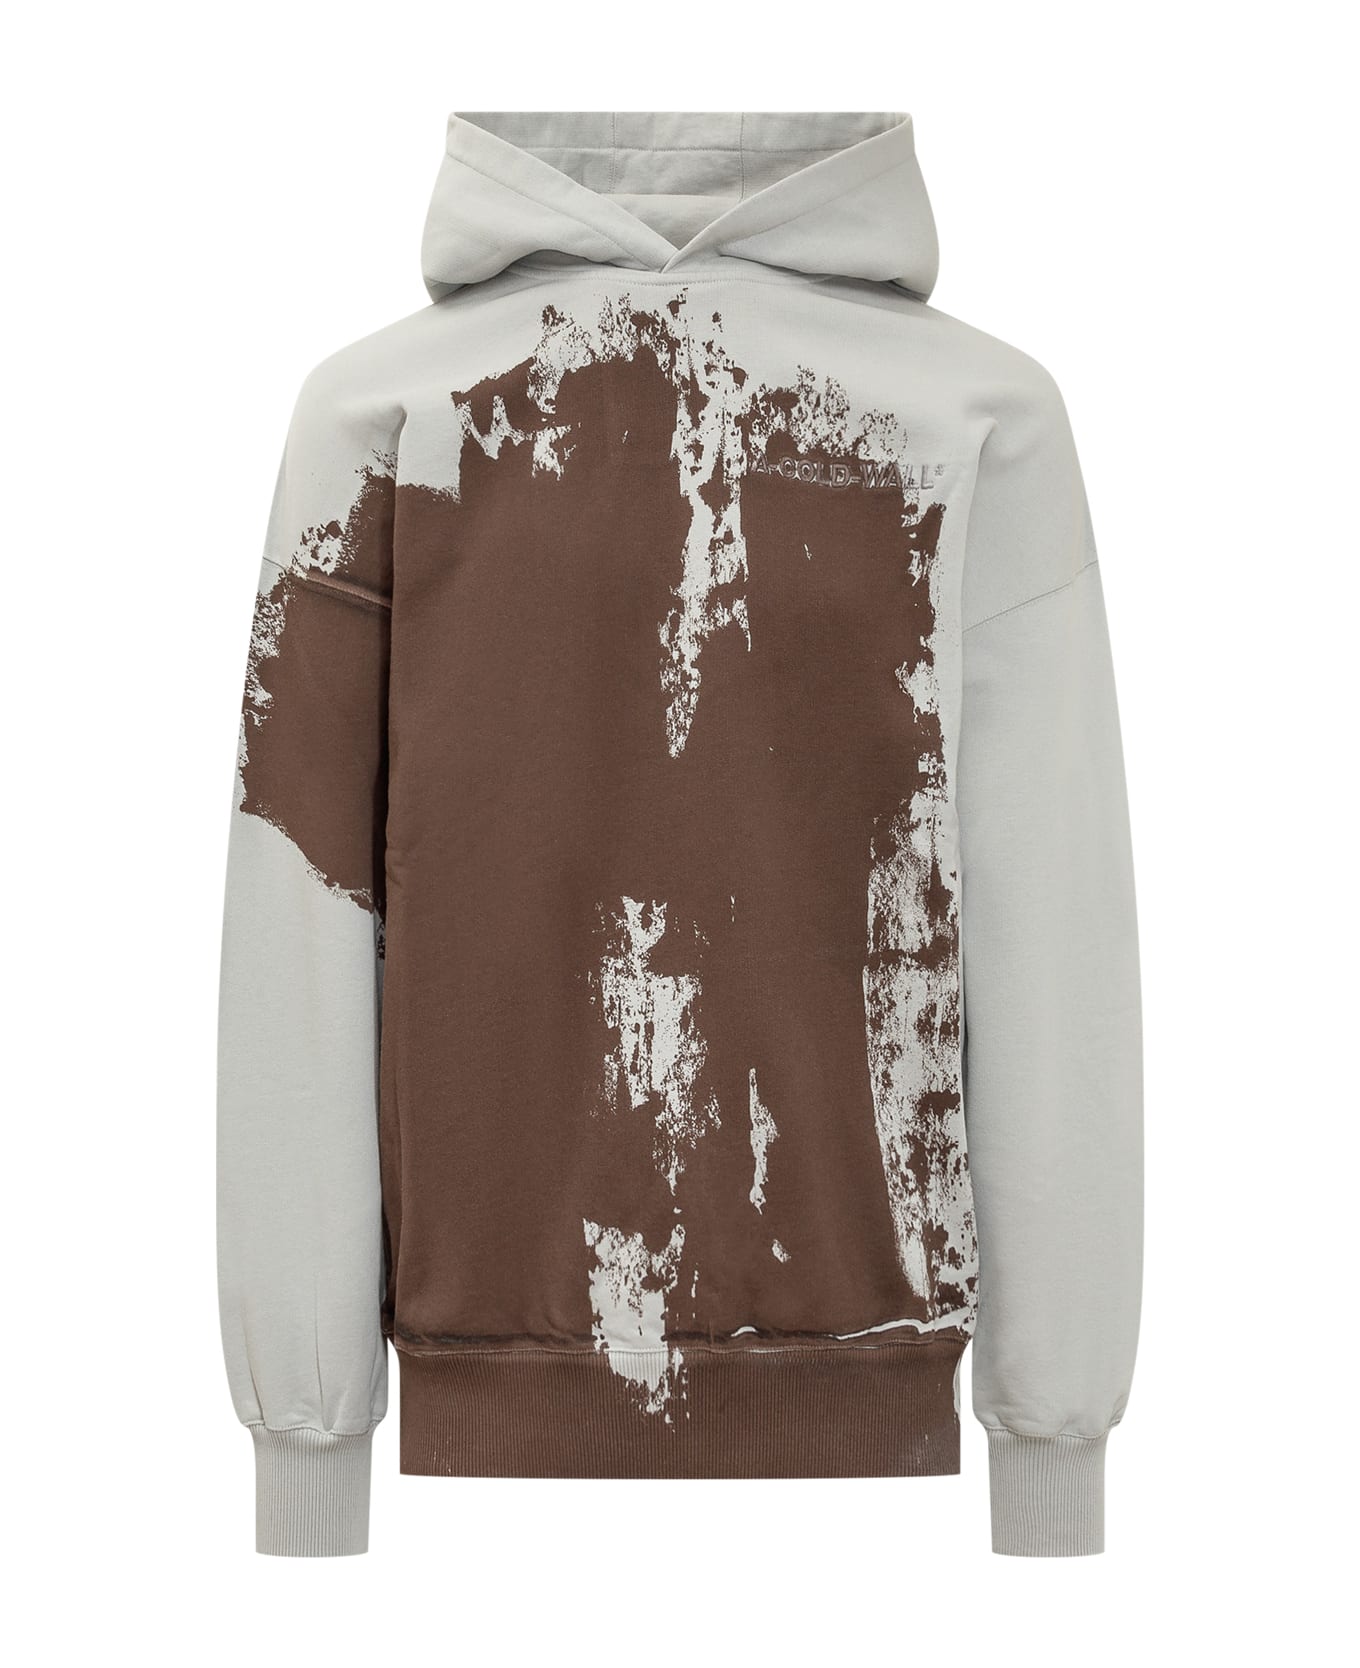 A-COLD-WALL Relaxed Studio Hoodie - DARK BROWN